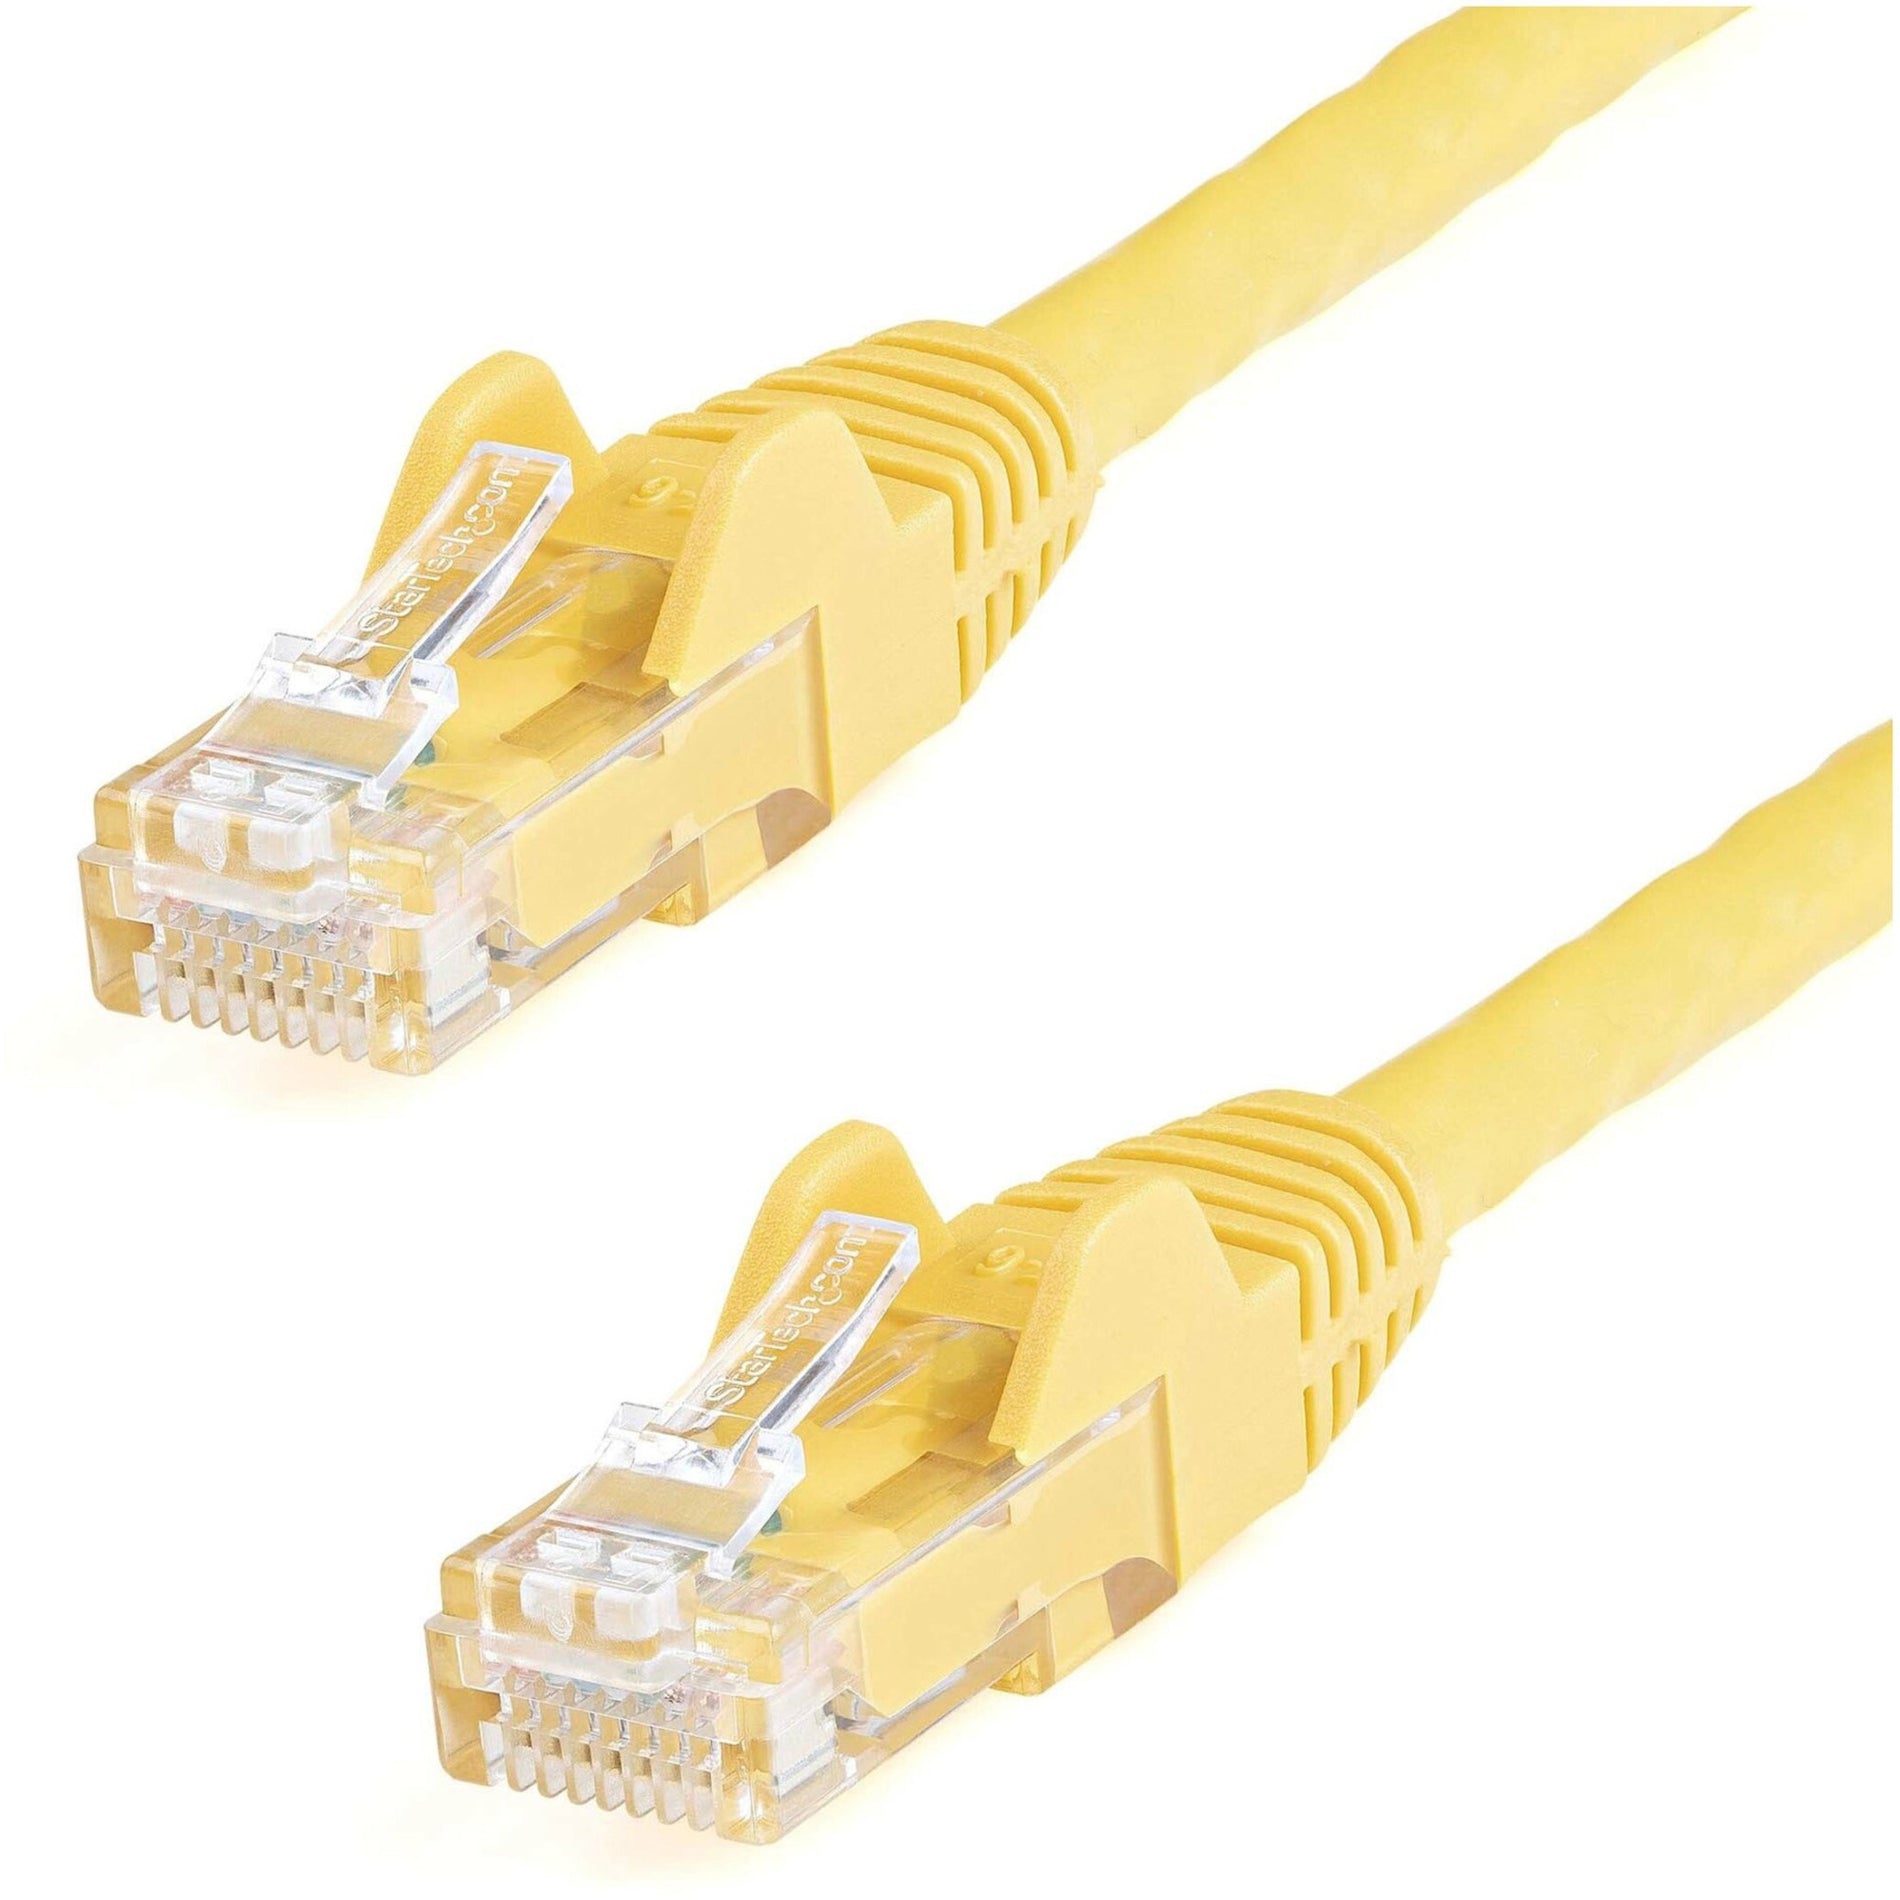 StarTech.com N6PATCH2YL Cat6 Network Cable, 2ft Yellow Ethernet Cable, Snagless RJ45 Connectors